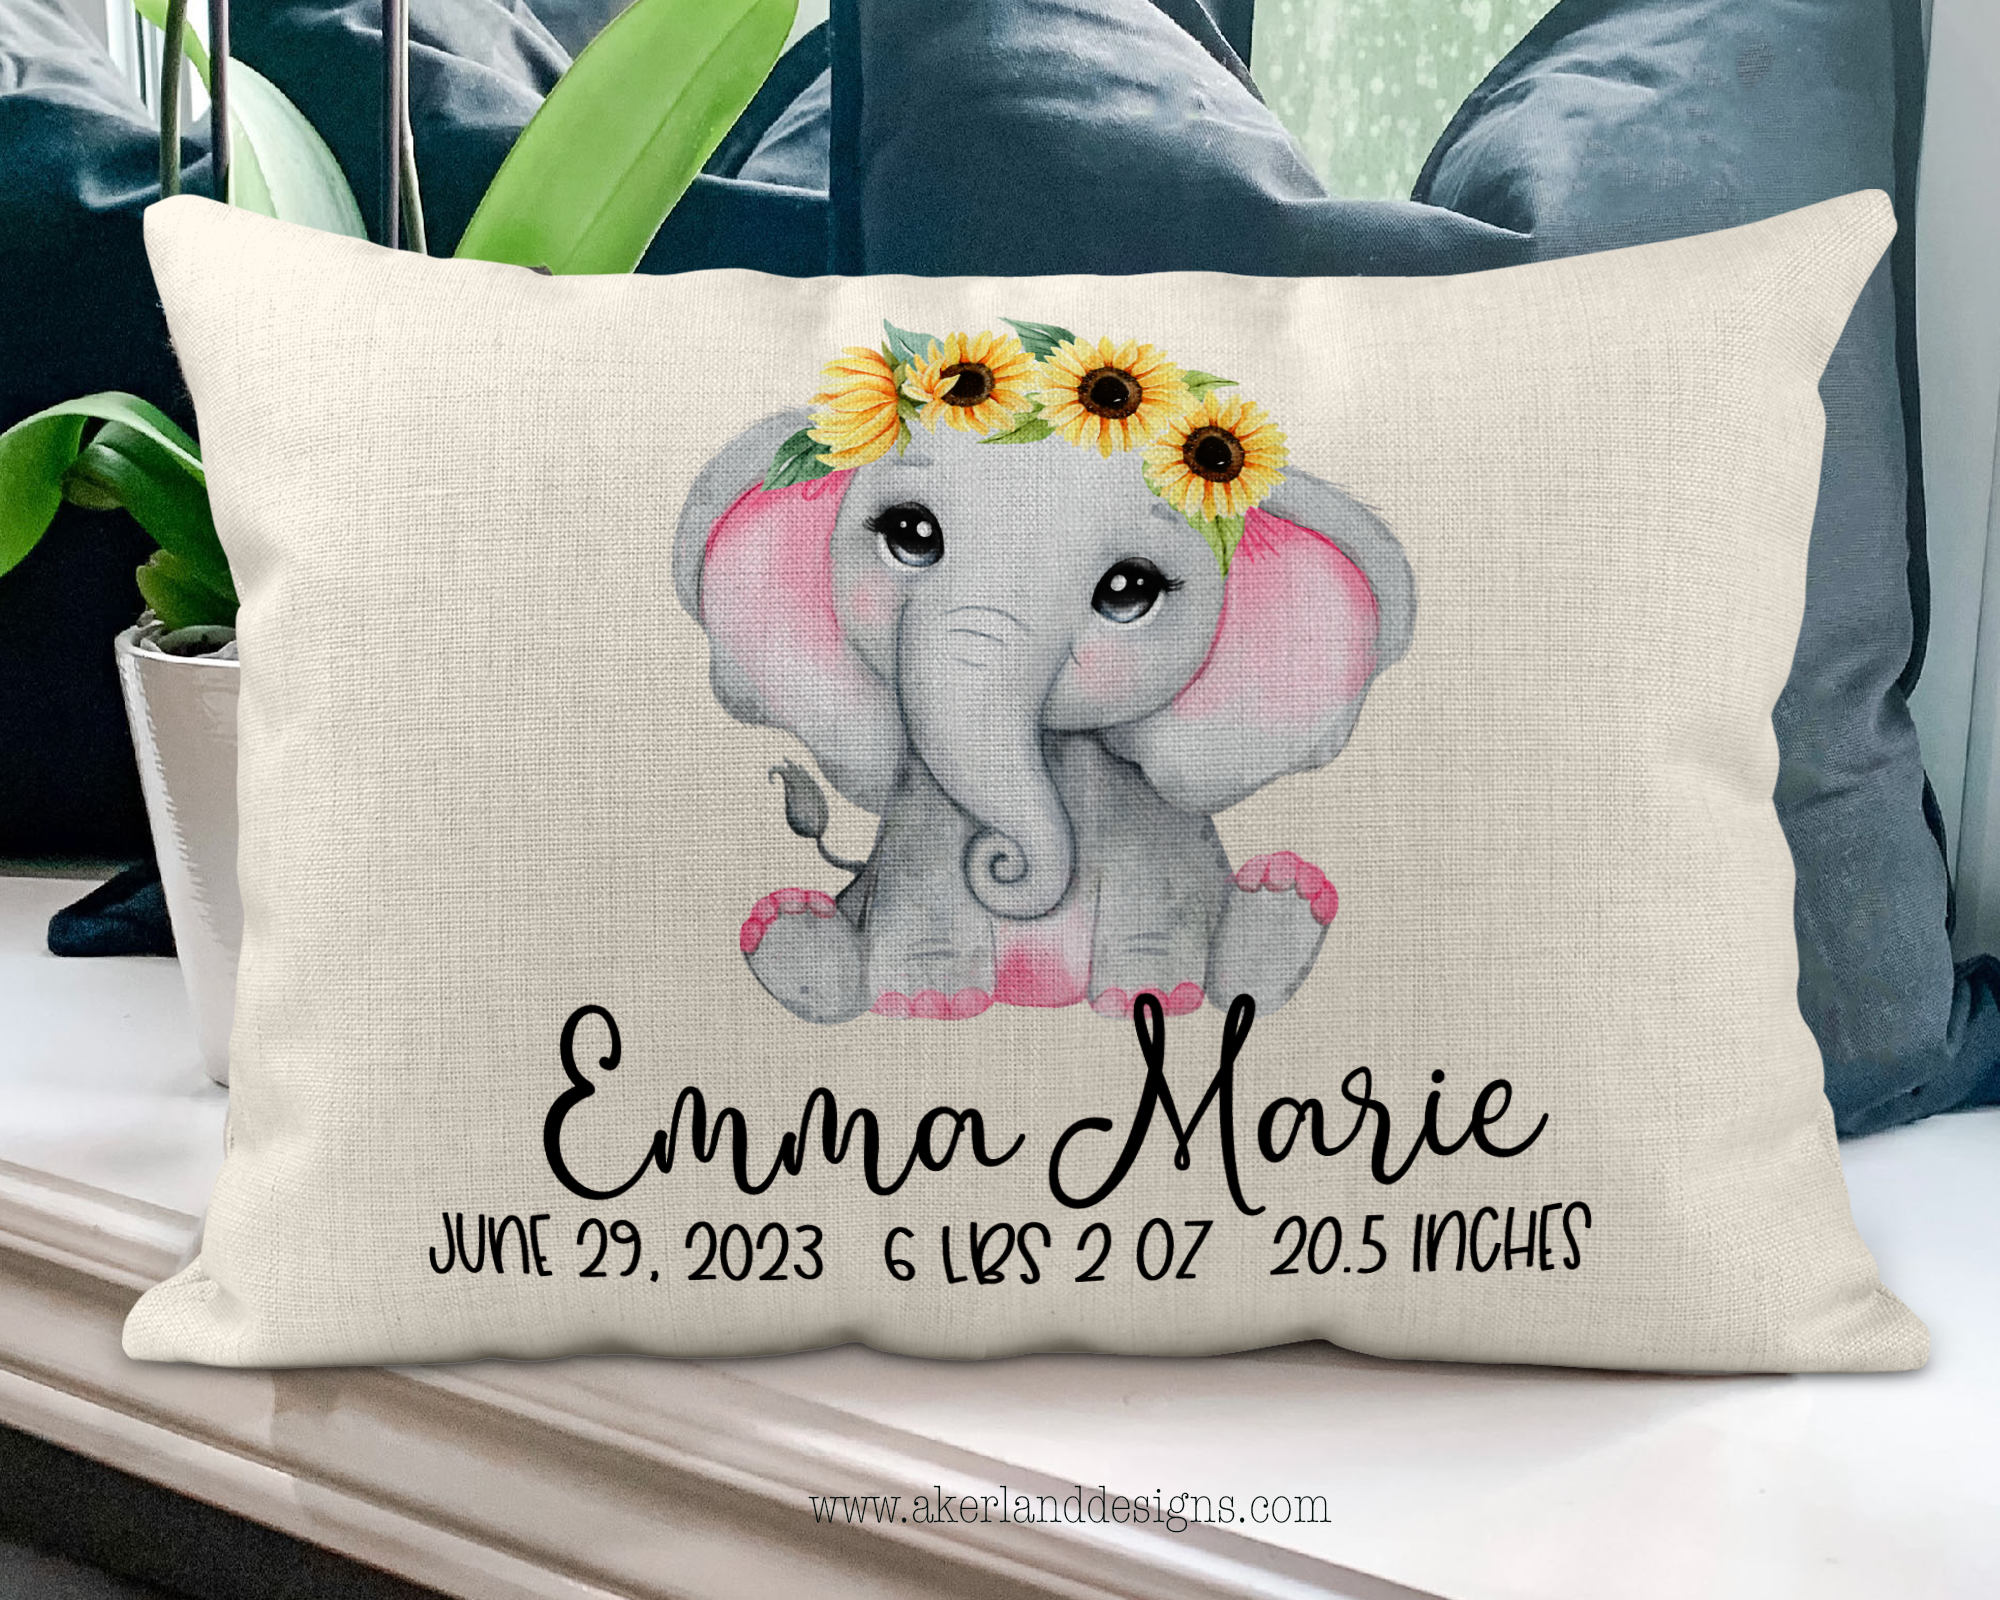 Birth Announcement Pillow made with sublimation printing